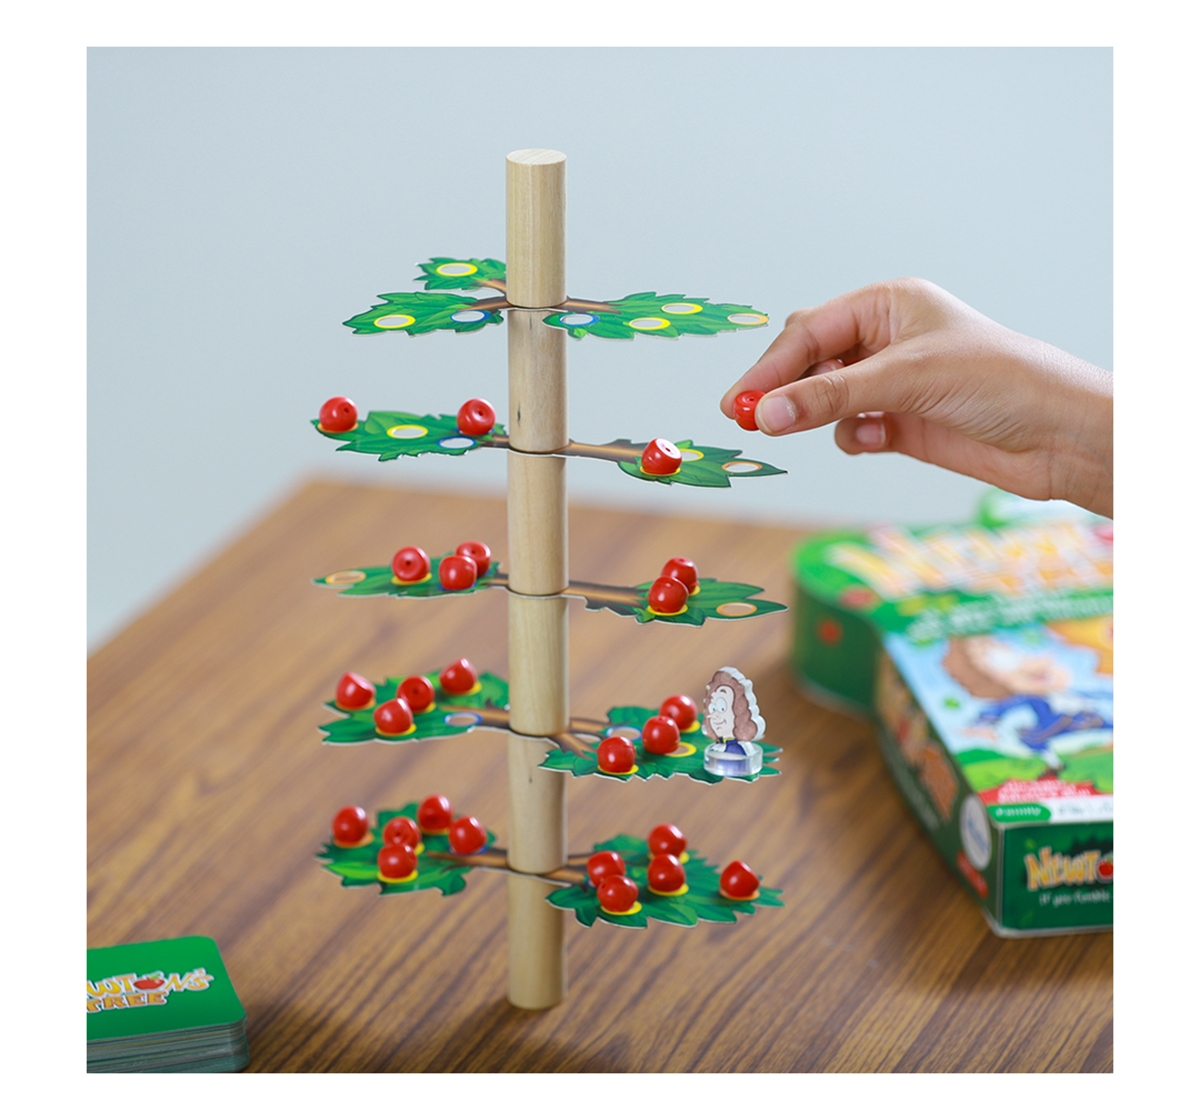 Skillmatics | Skillmatics Newton'S Tree | Fun Family Game Of Balancing And Skill For Kids Ages 6 And Up  Games for Kids age 6Y+  2